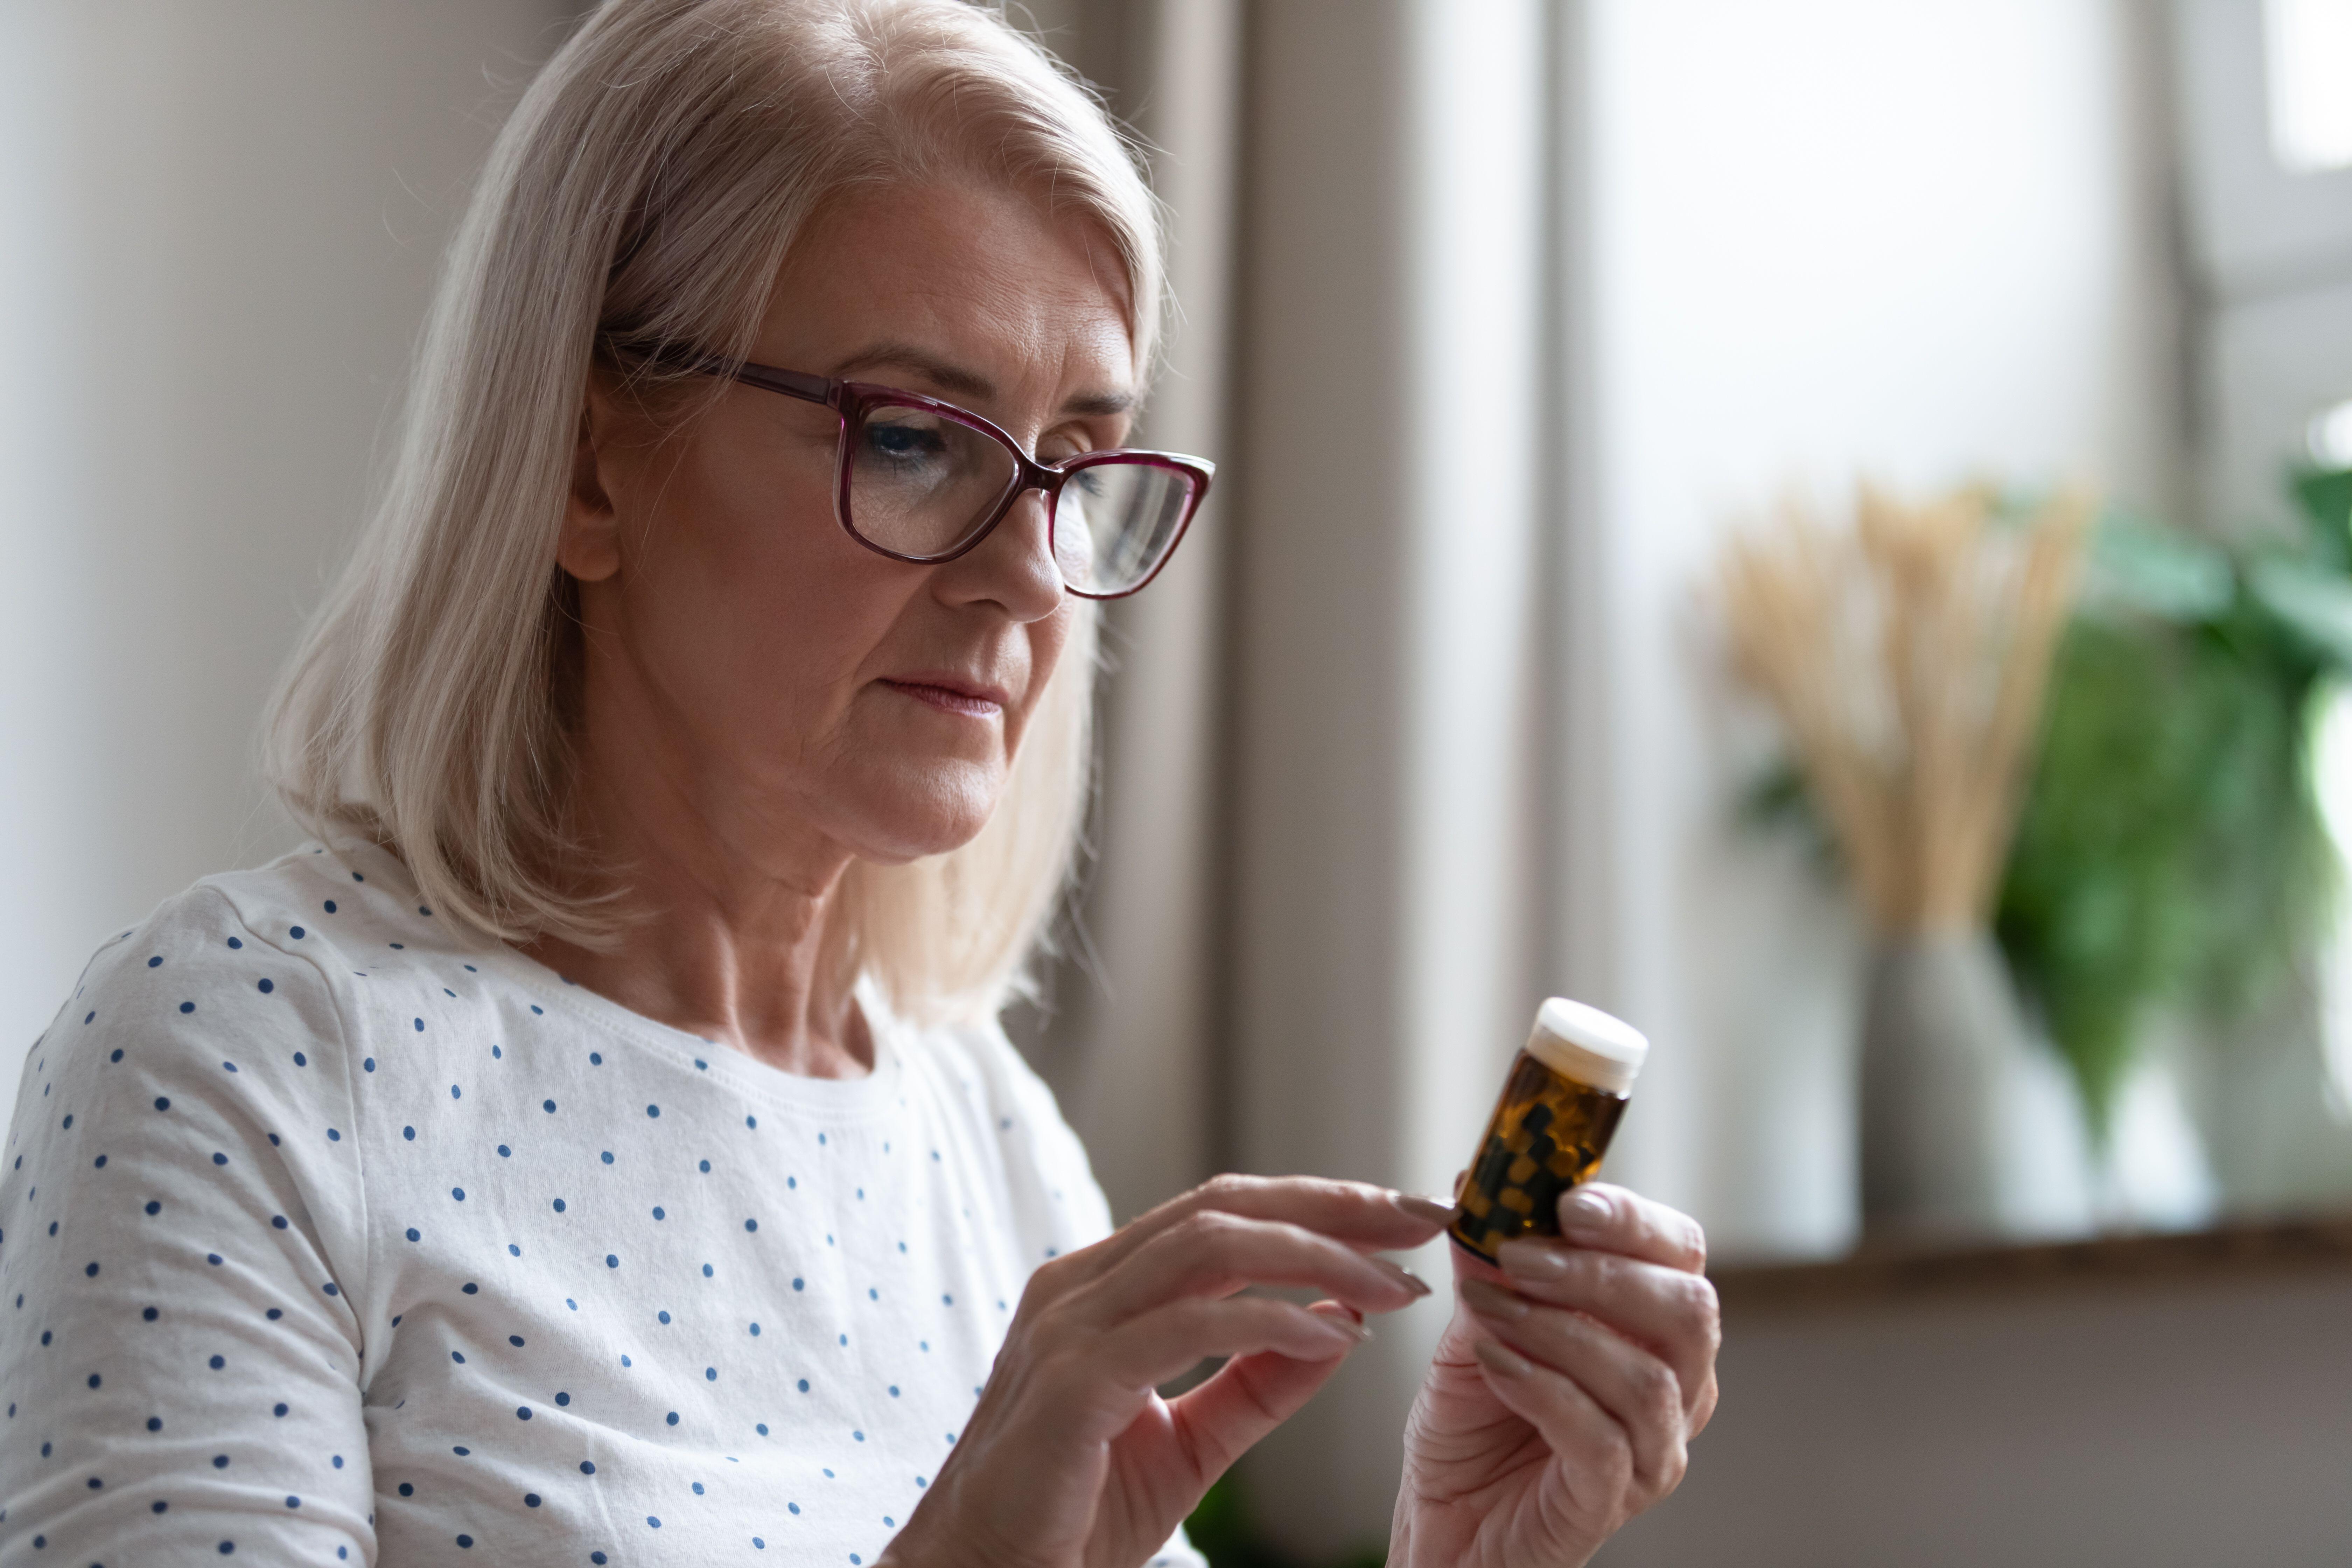 A woman reading the label on a pill bottle